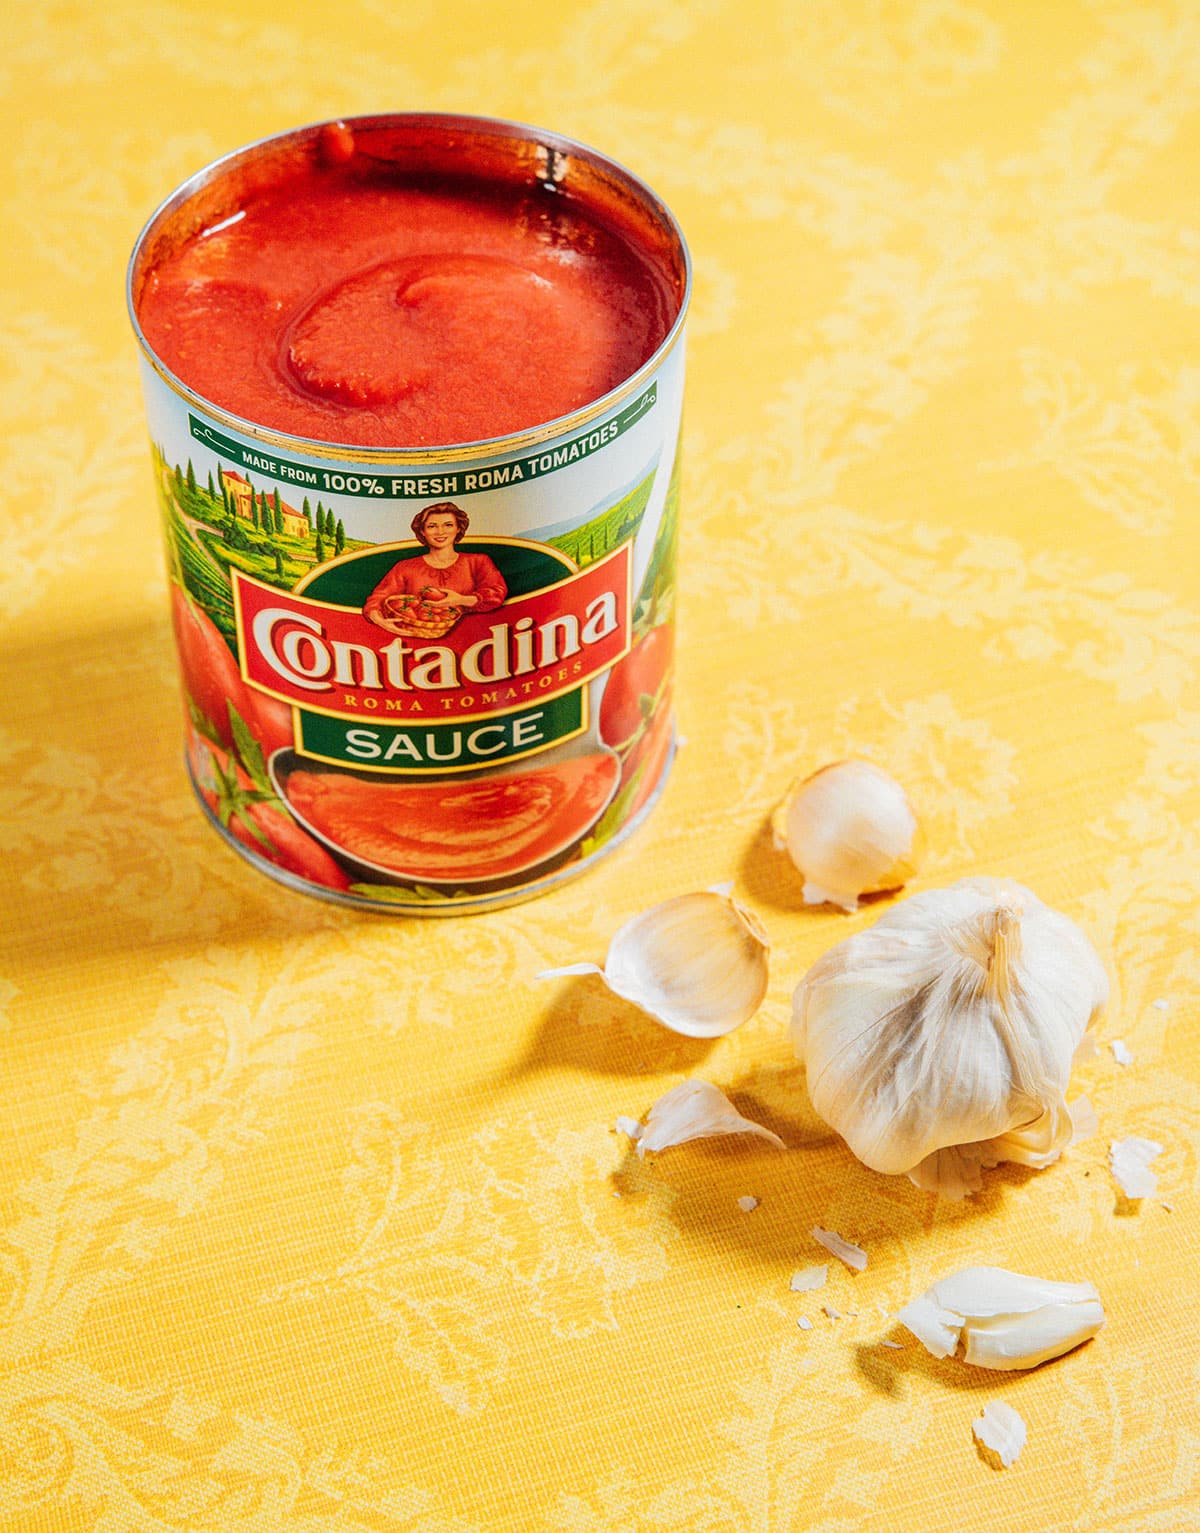 Can of tomato sauce with some garlic.